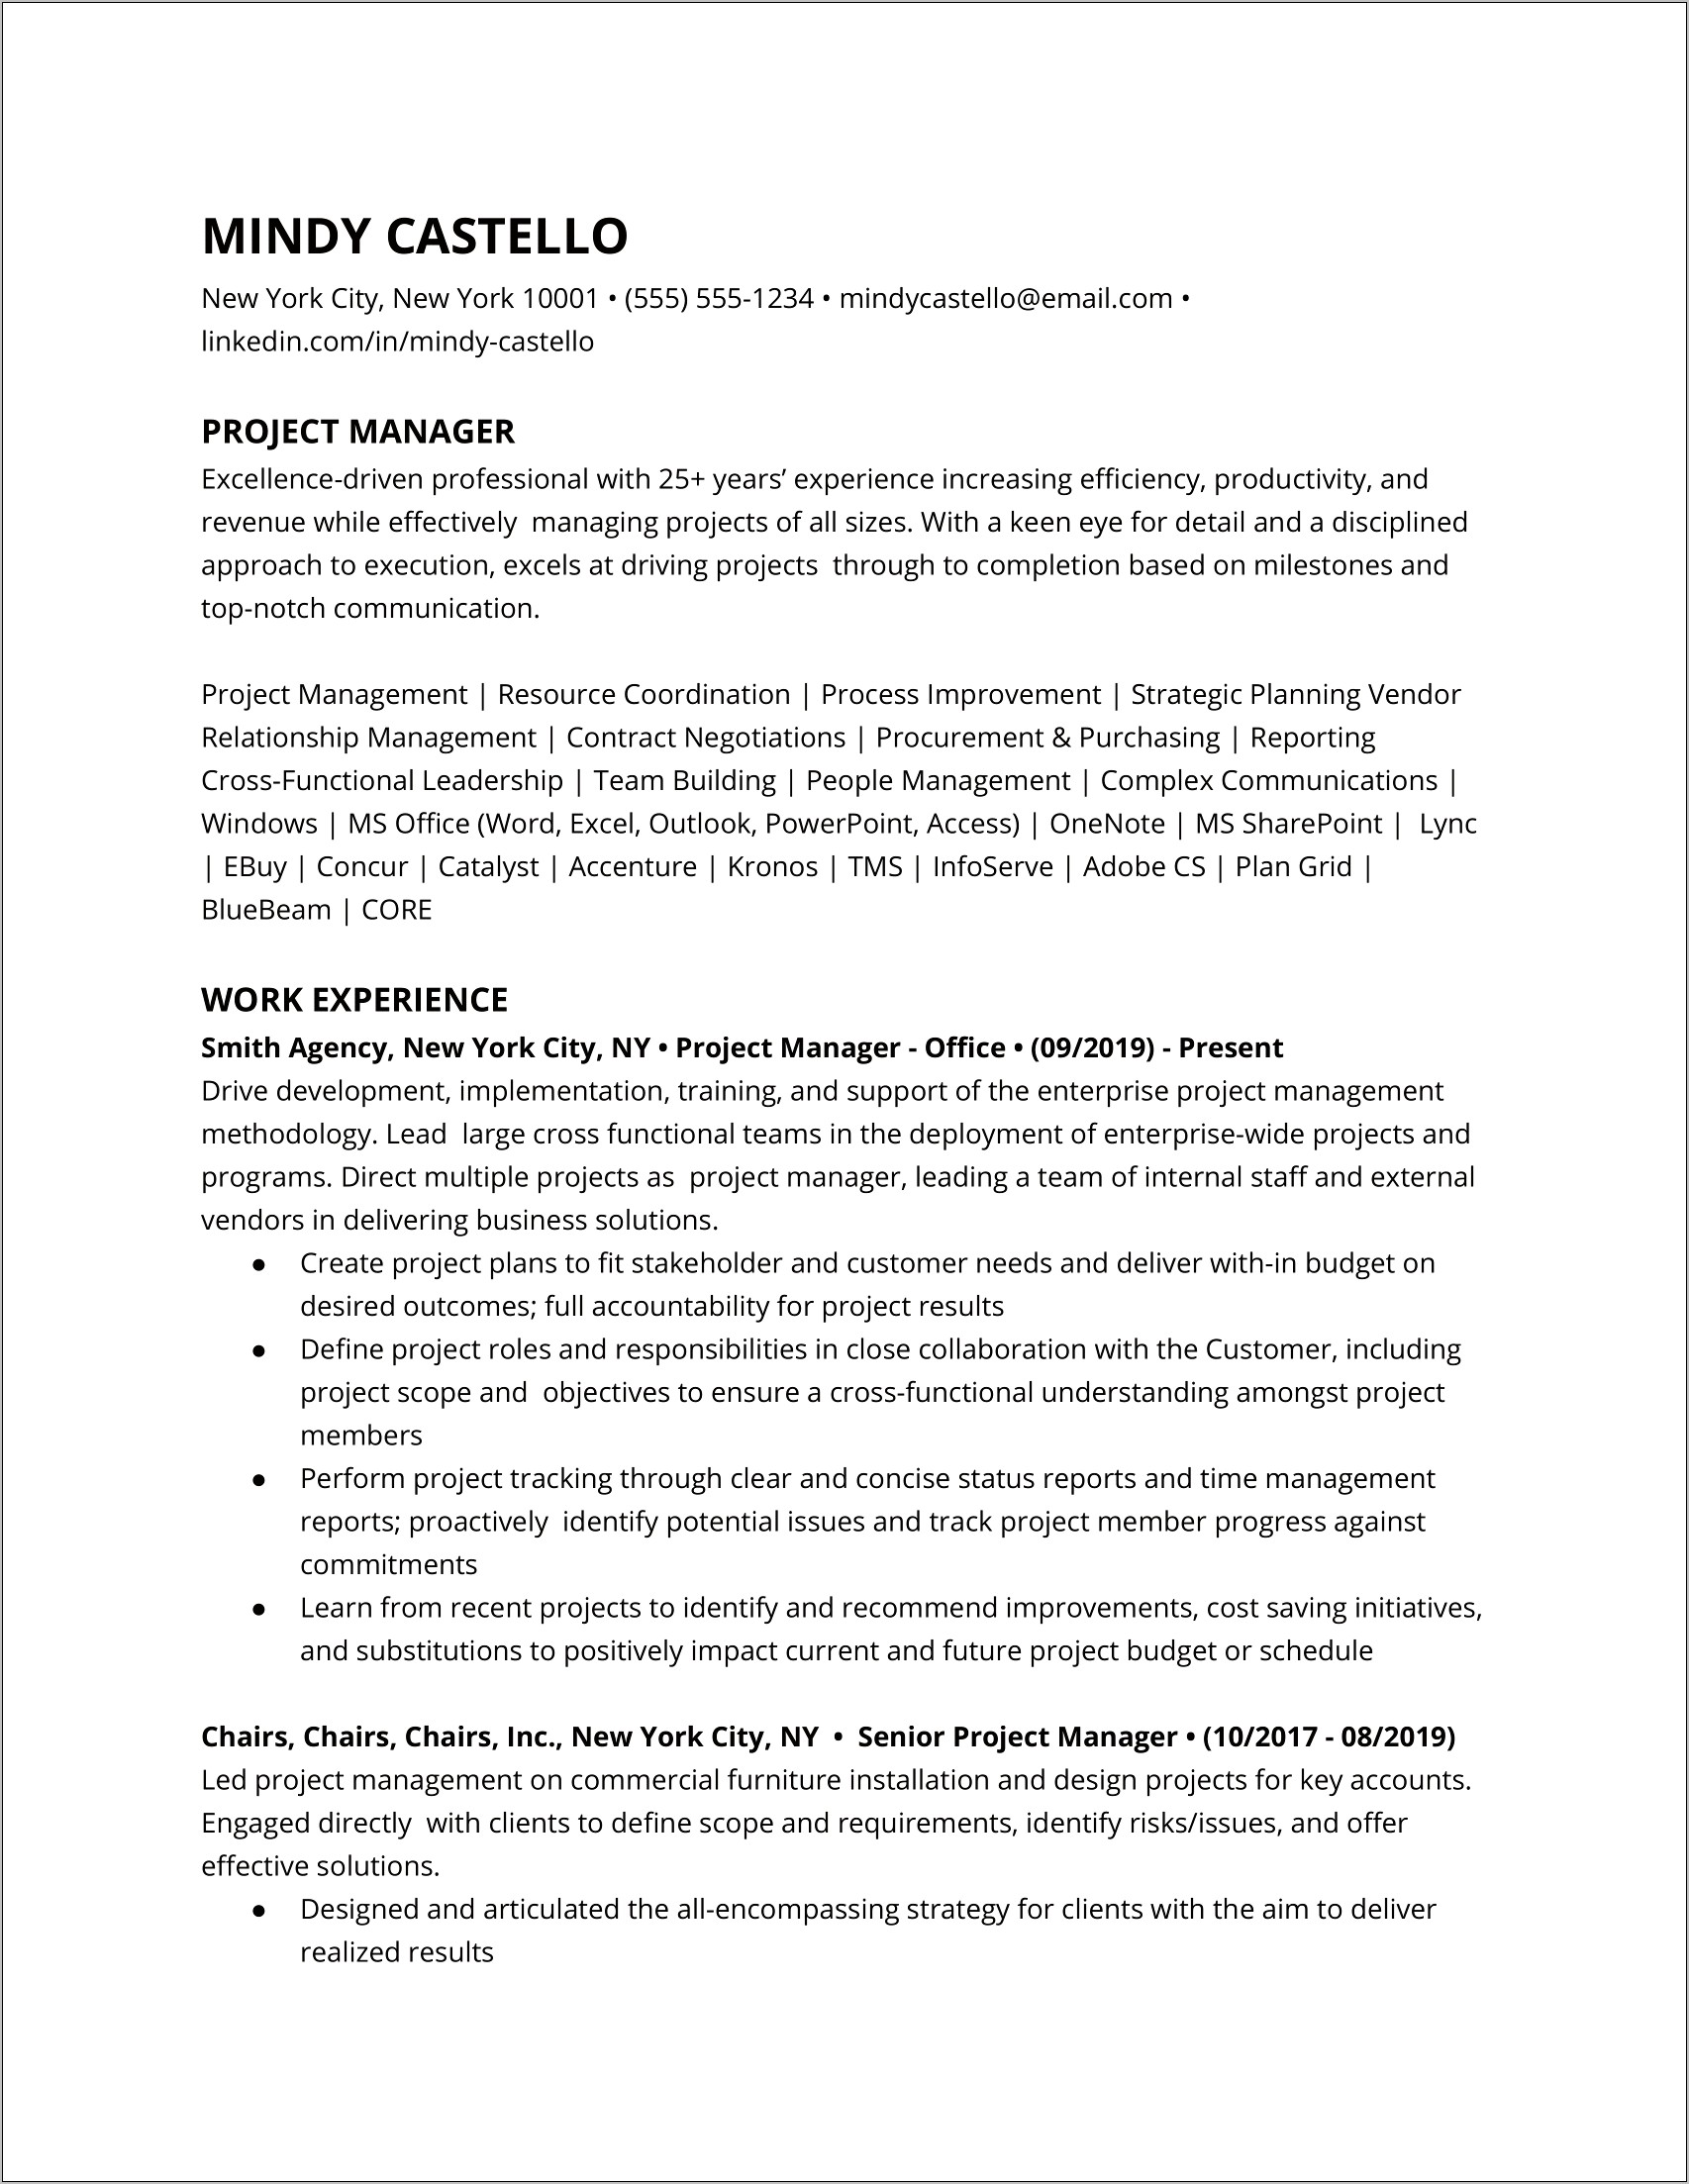 Resume With Over 25 Years Experience